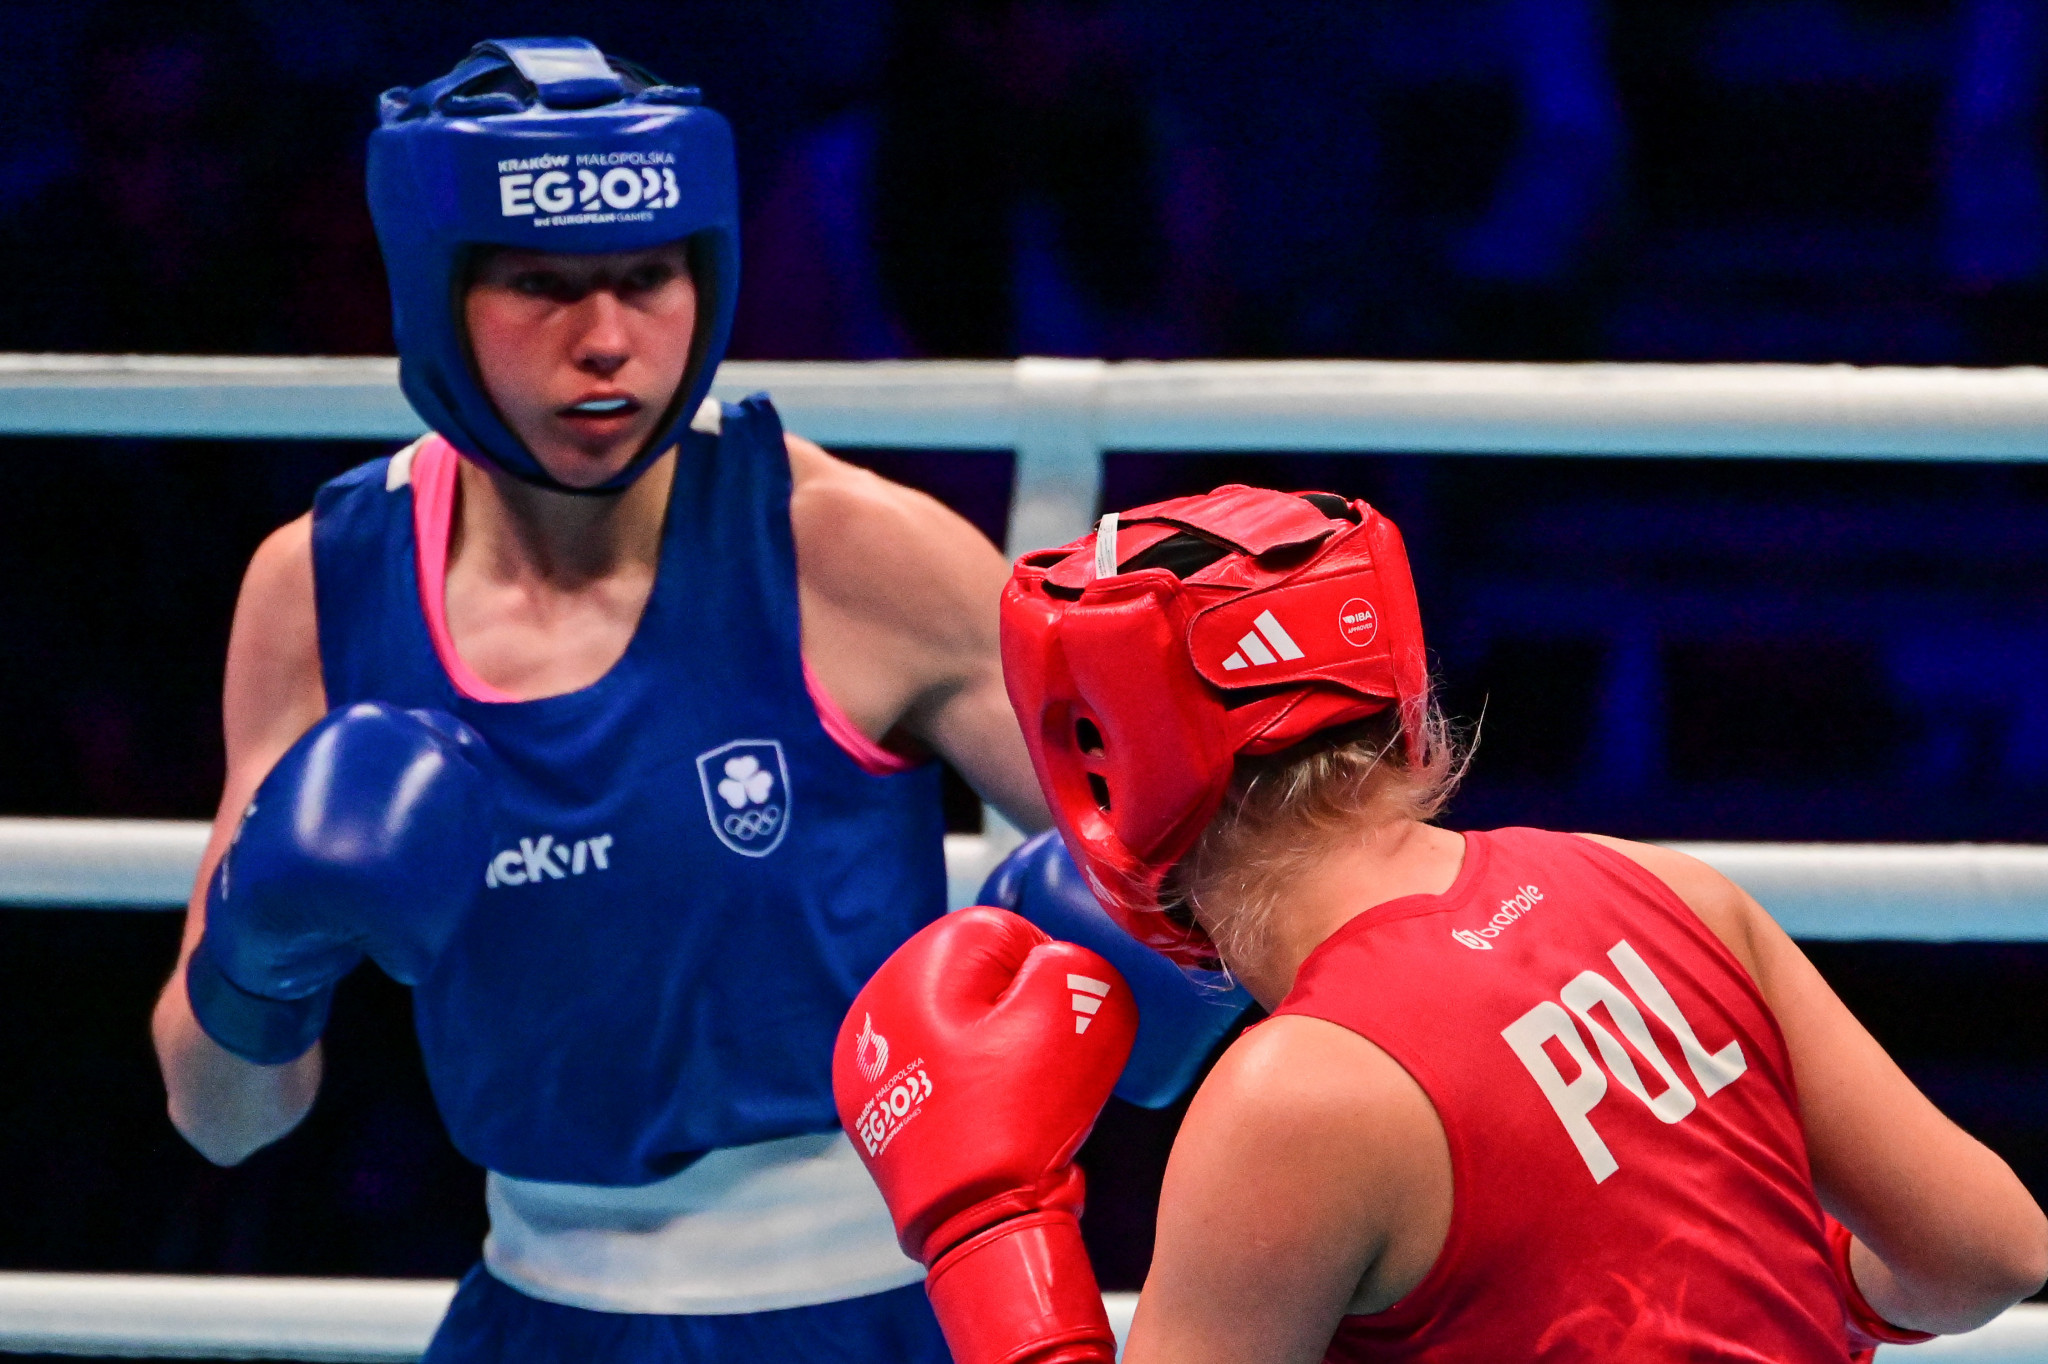 Ireland's Aoife O'Rourke, left, narrowly came through her women's under-75kg semi-final against Polish home favourite Elżbieta Wójcik , right, for her country's fifth Olympic quota place from the European Games ©Kraków-Małopolska 2023